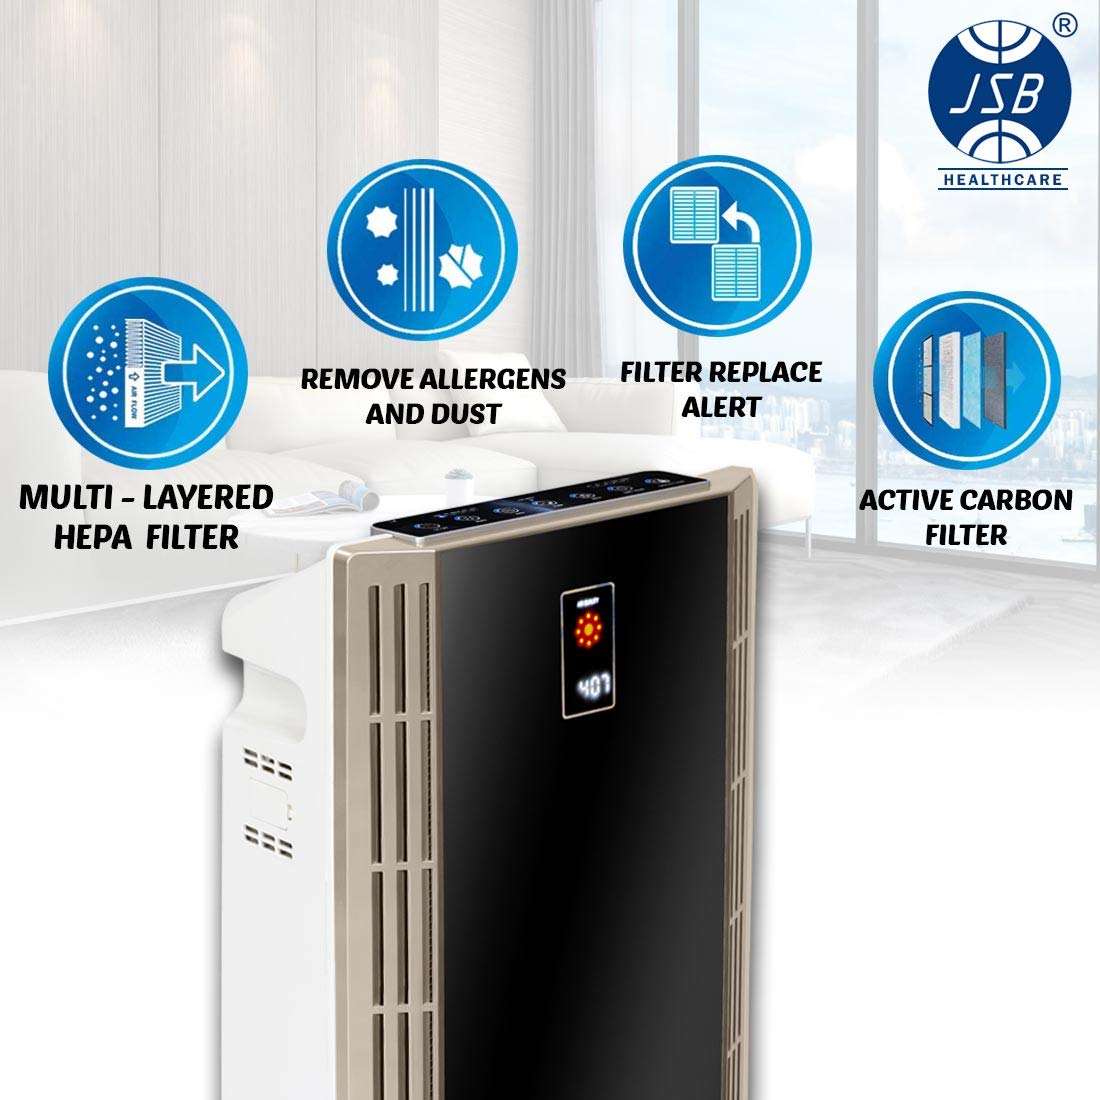 Air Purifier with AQI Display for Live Monitoring of Indoor Air JSB HF131 - JSB Healthcare 